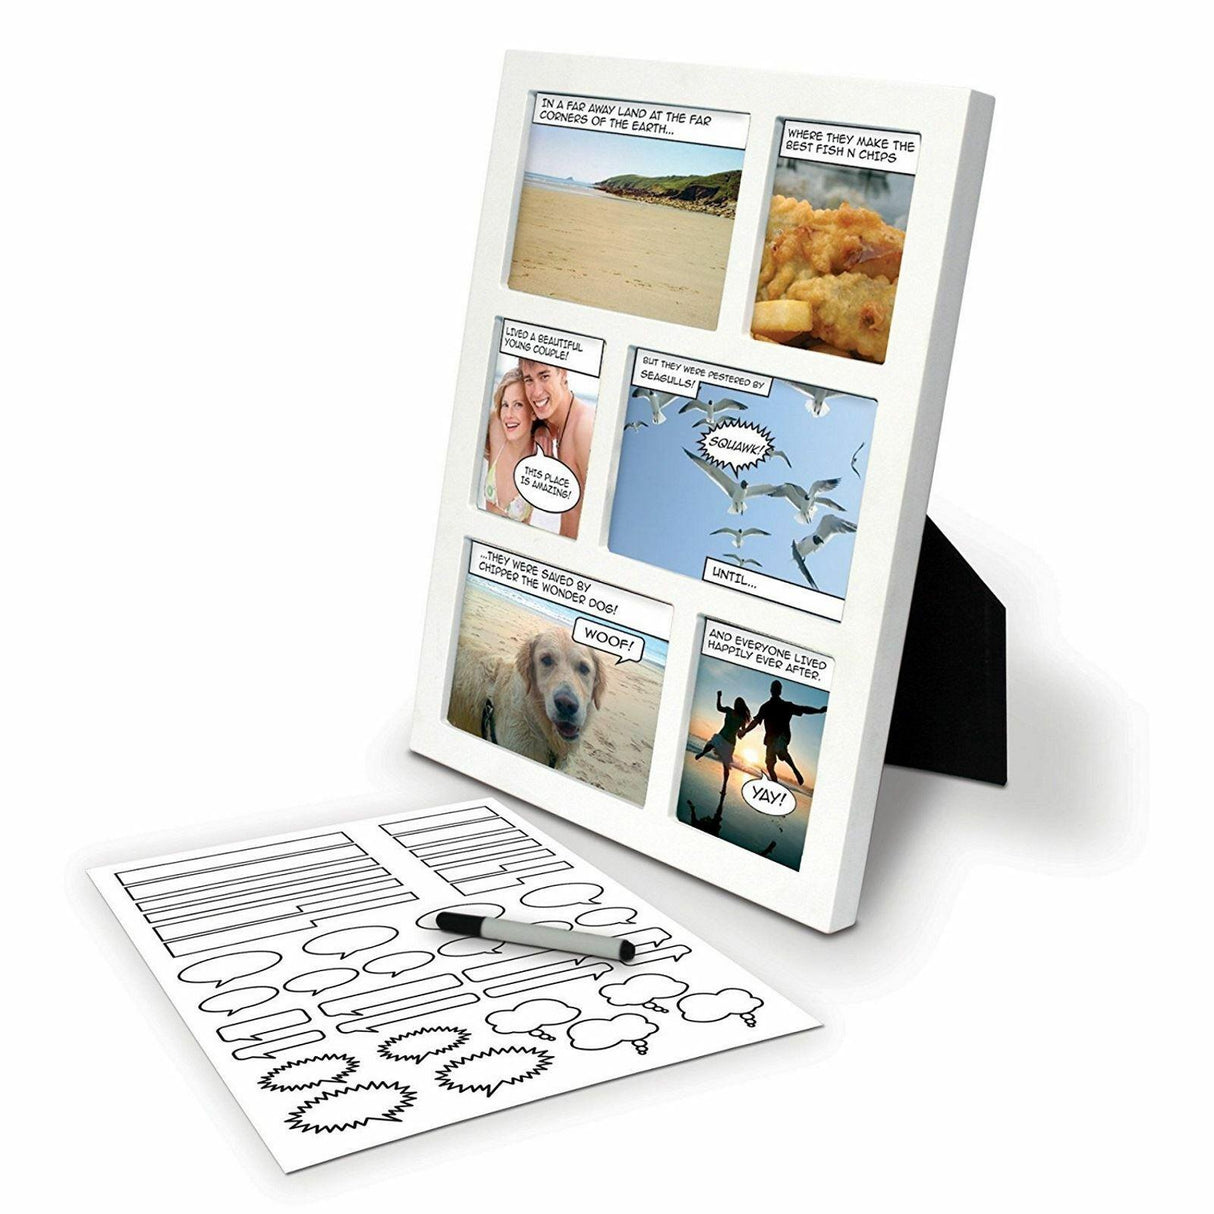 Marvel Comic Photo Frame Multi Picture White Frame With Speech Bubble Stickers & Marker